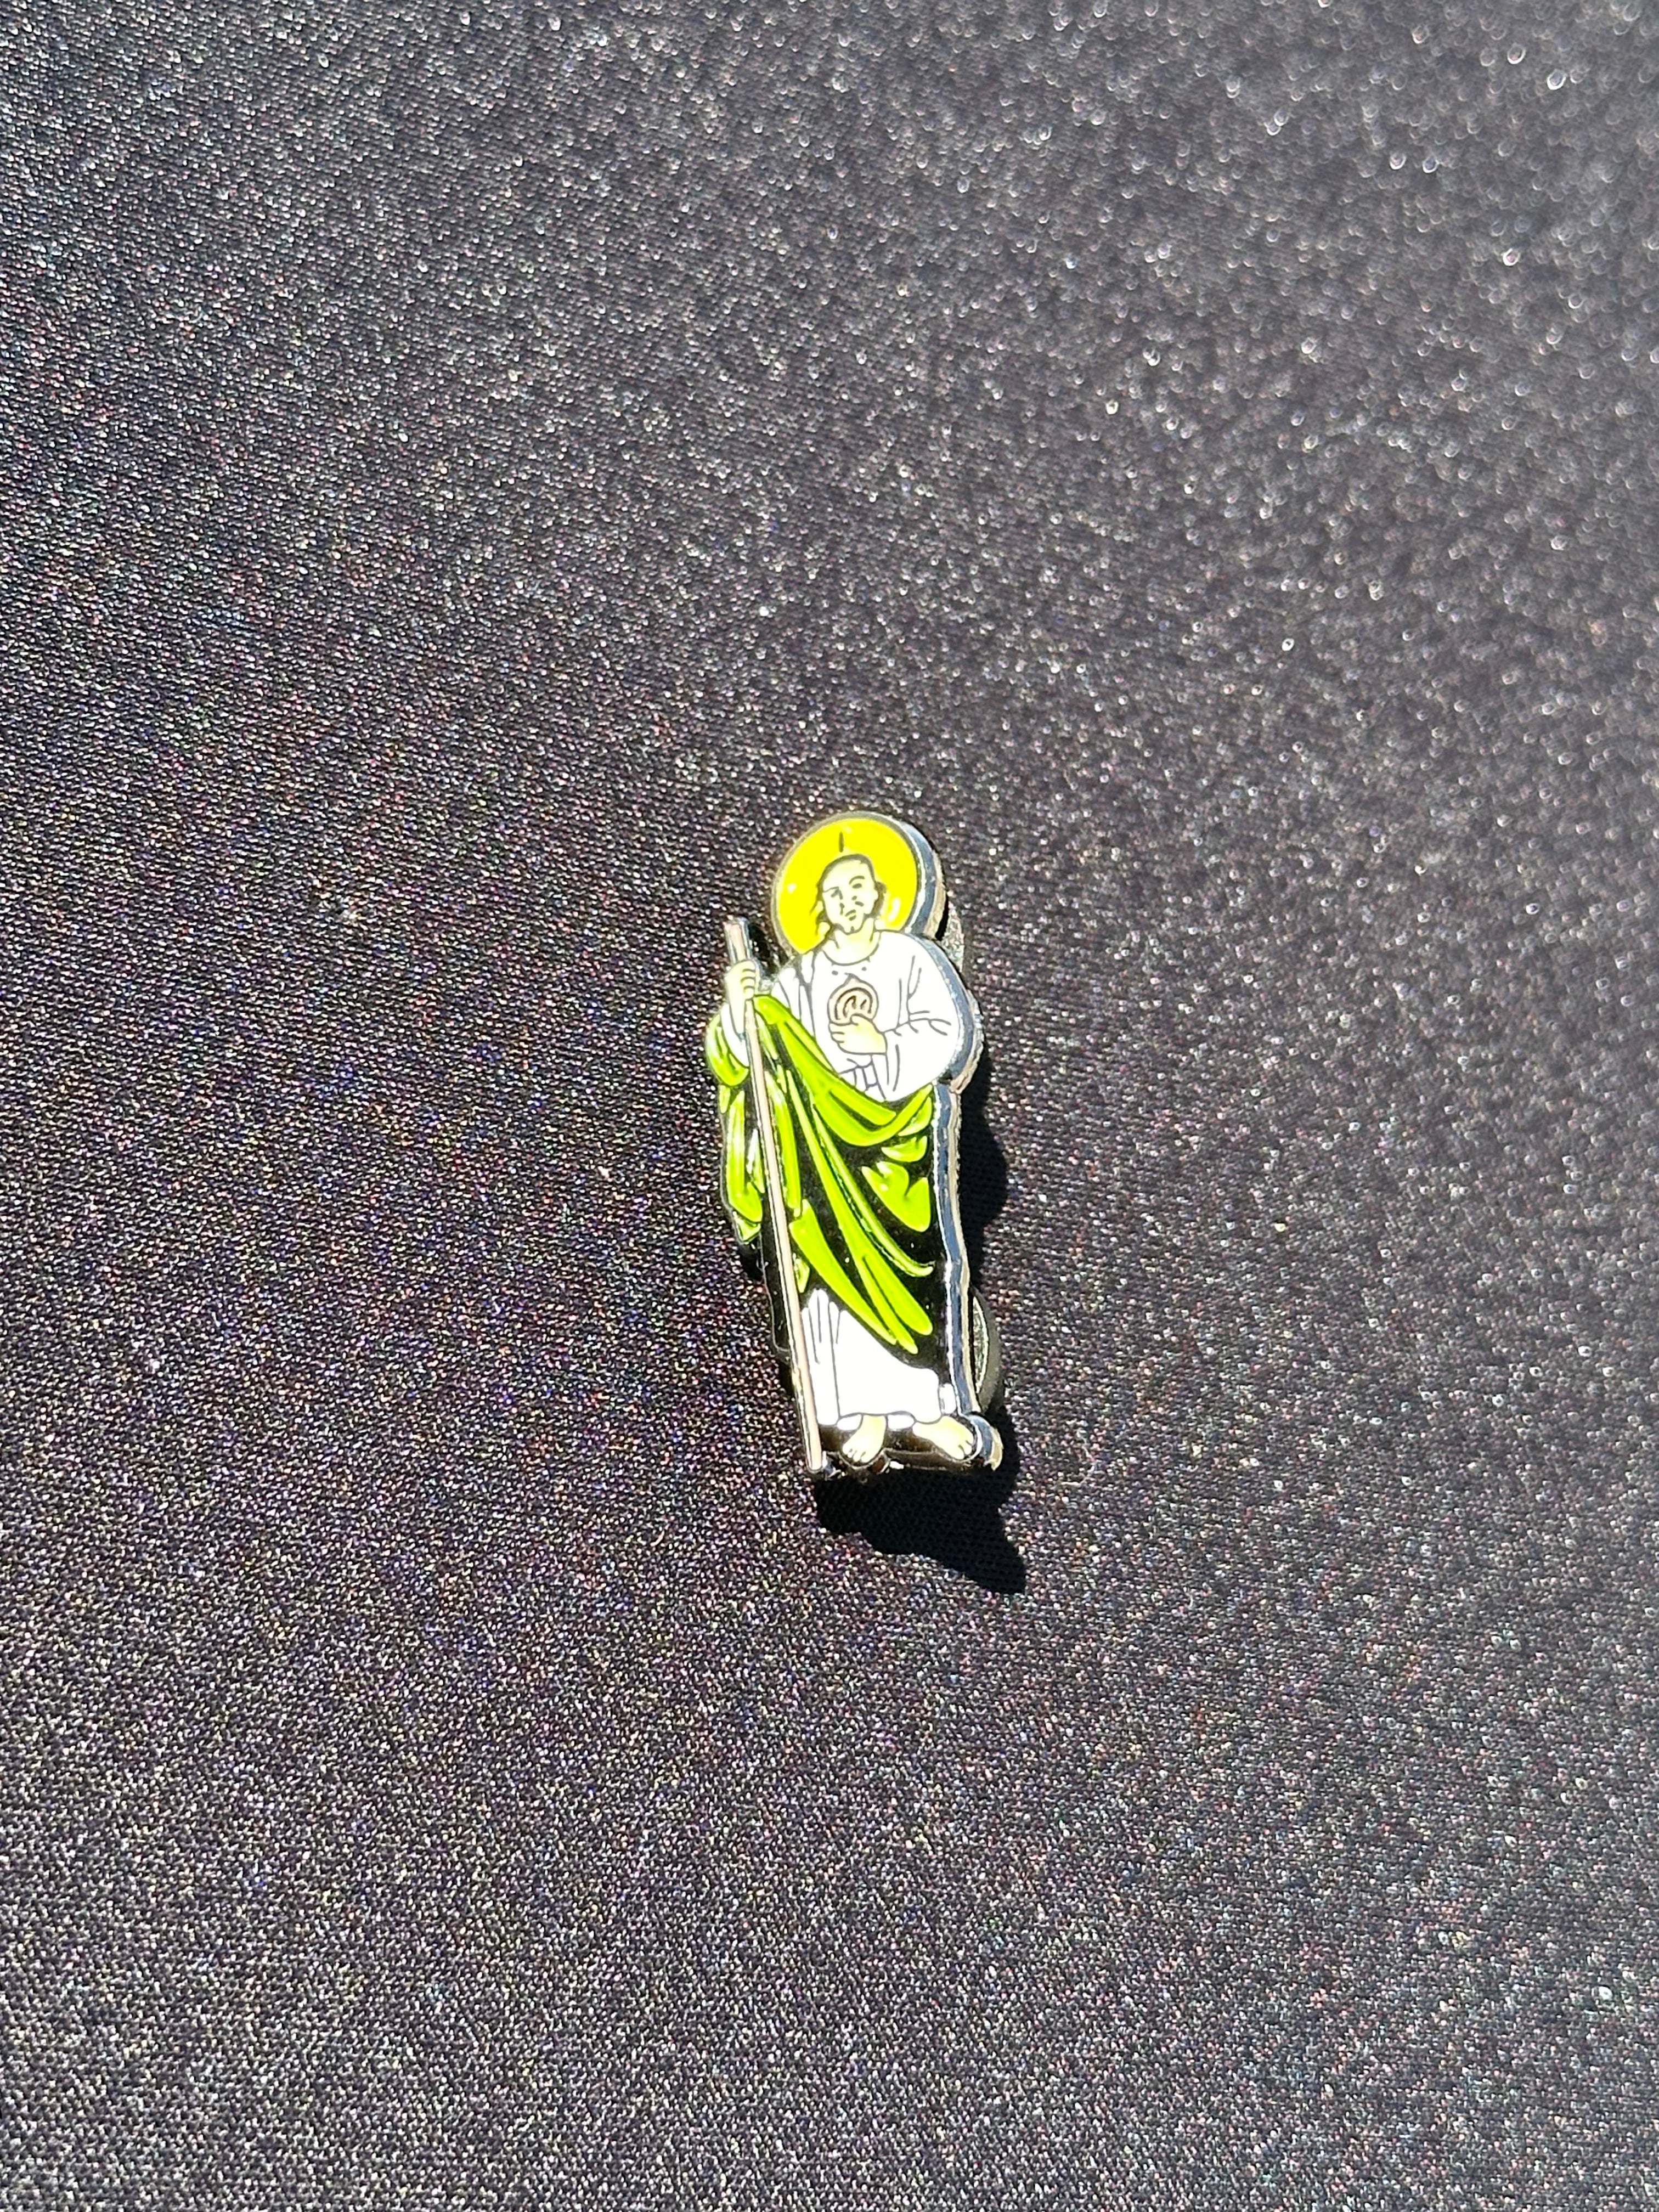 *NEW GOLD "SAN JUDAS TADEO" EXCLUSIVE PIN VERY LIMITED